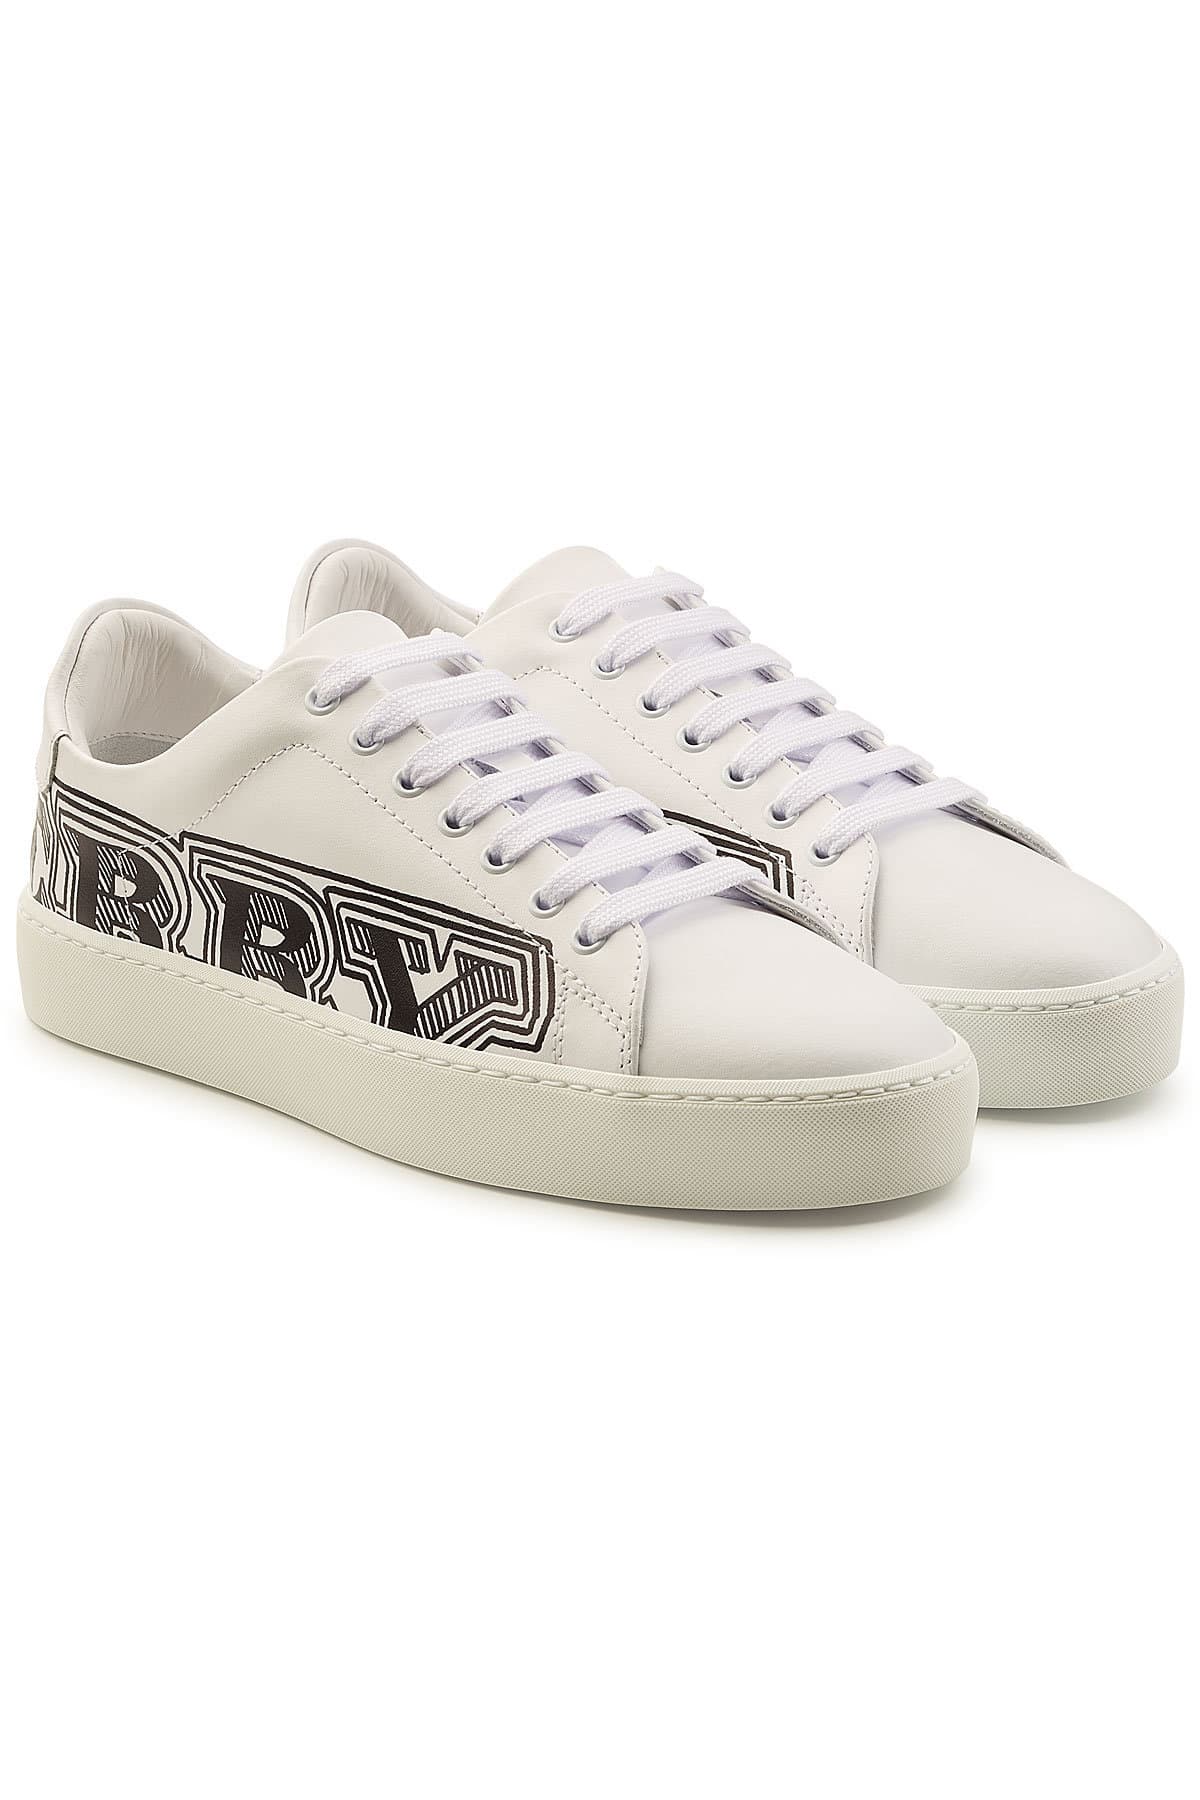 Burberry - Westford Printed Leather Sneakers